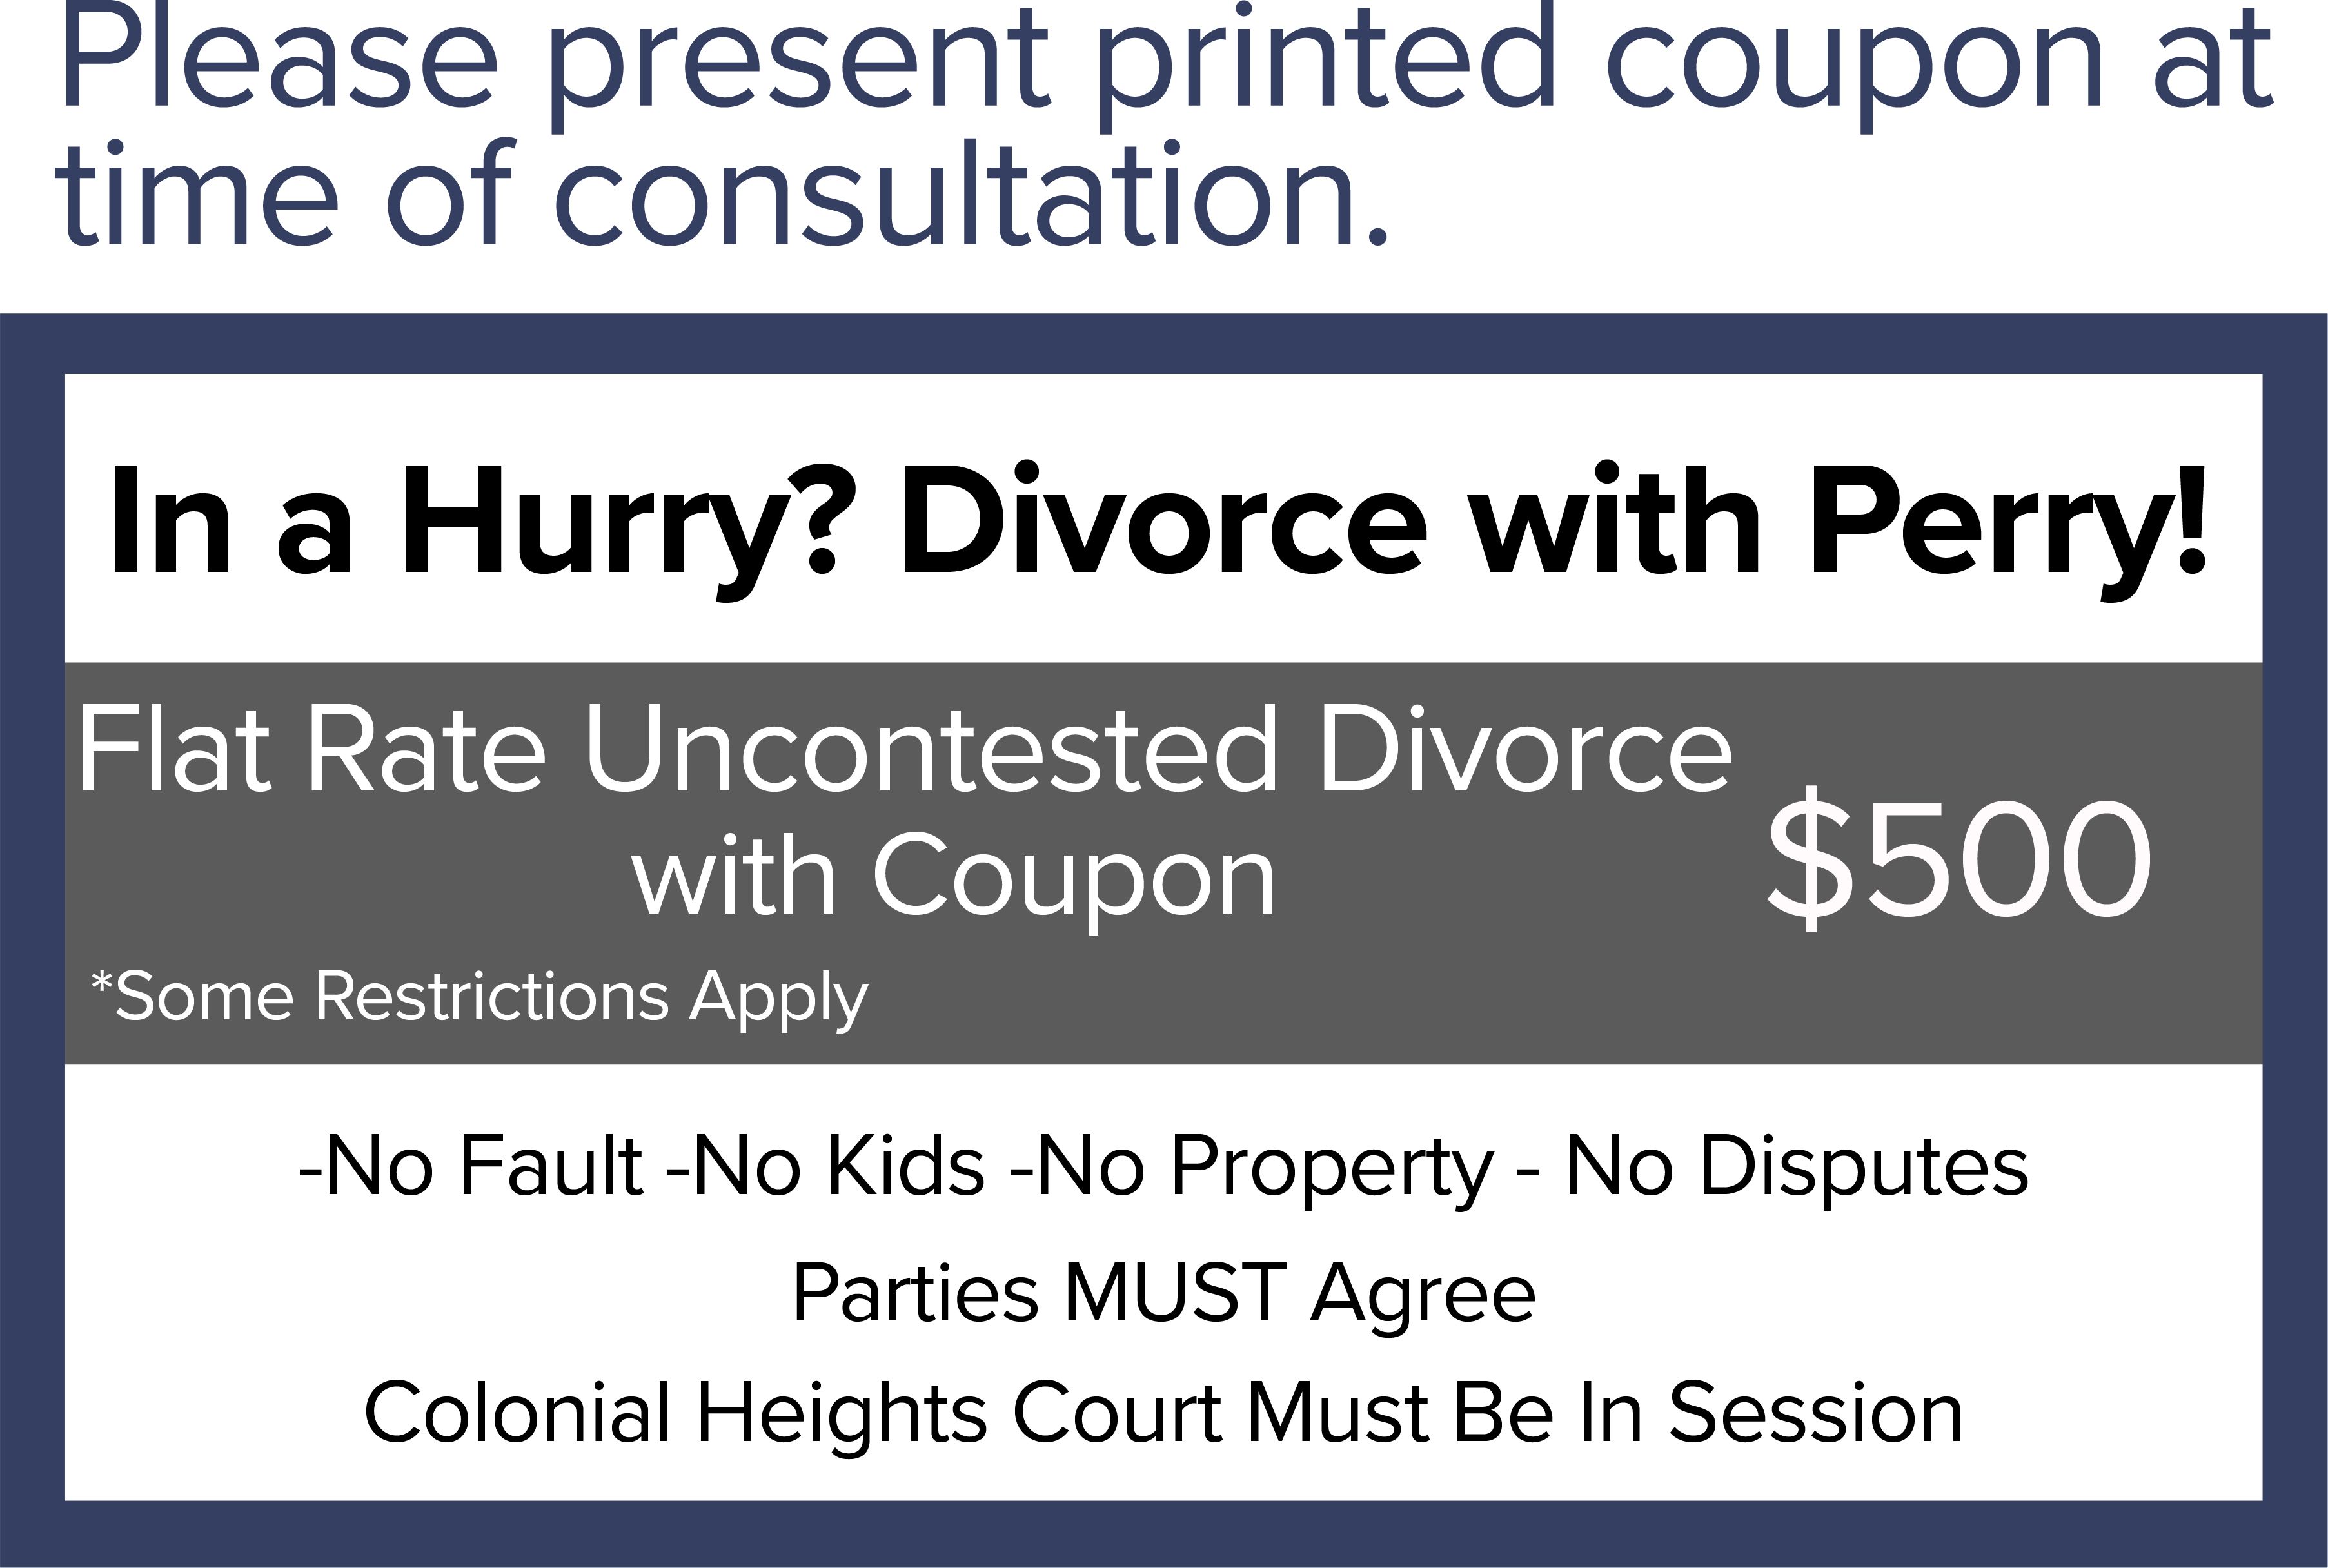 Divorce coupon from Perry Law Group